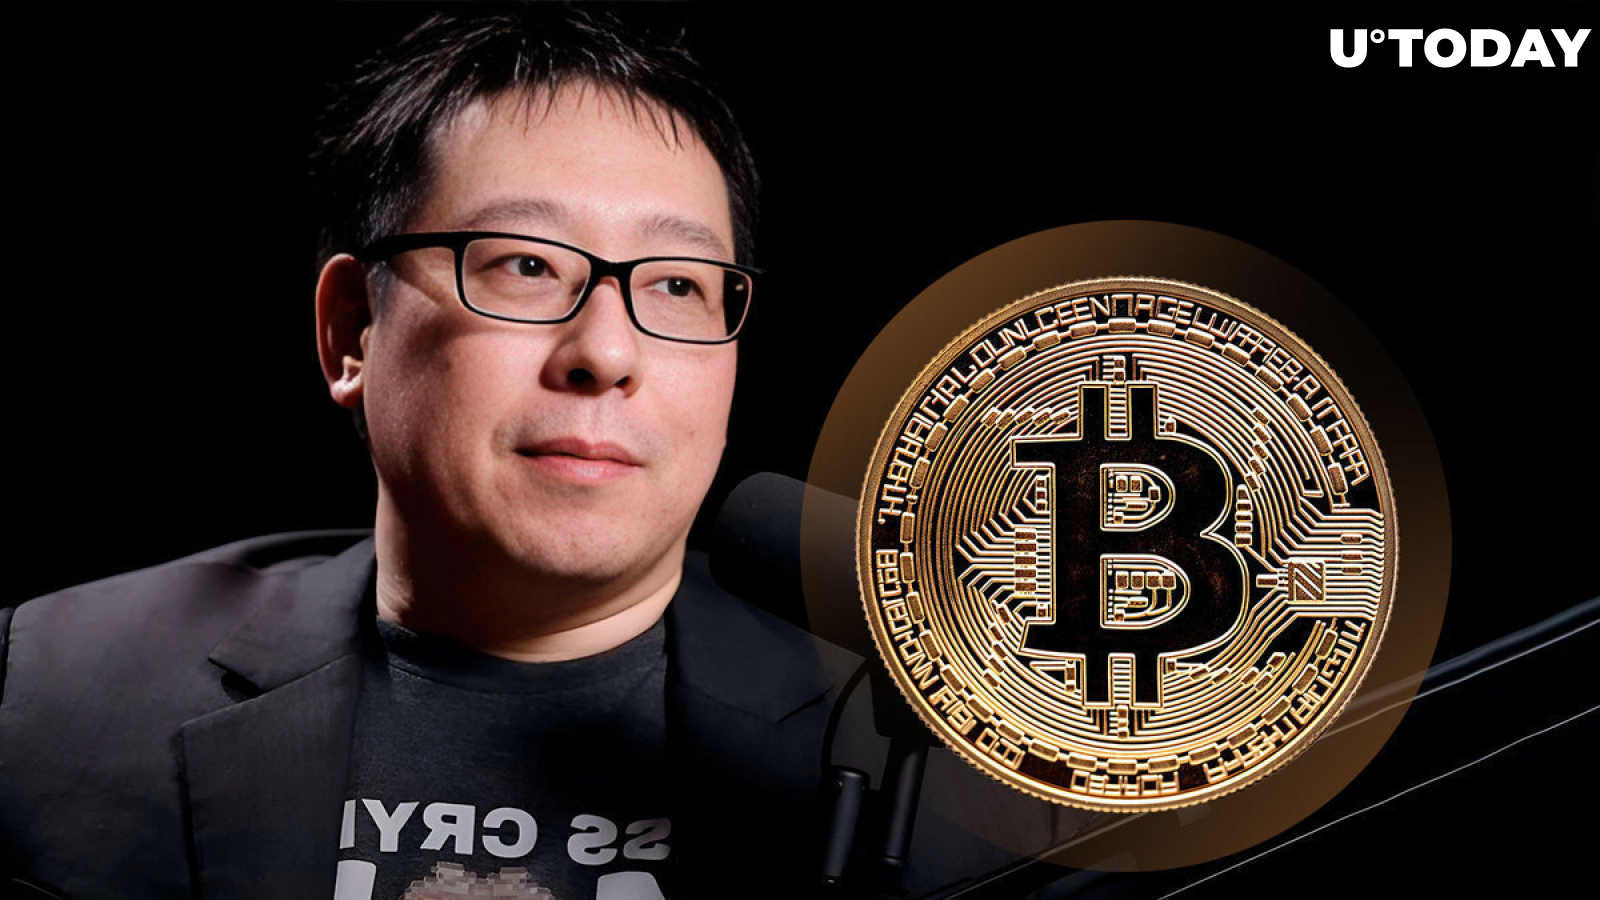 Satoshi and Bitcoin Put End to Monetary Dark Ages, Samson Mow Suggests